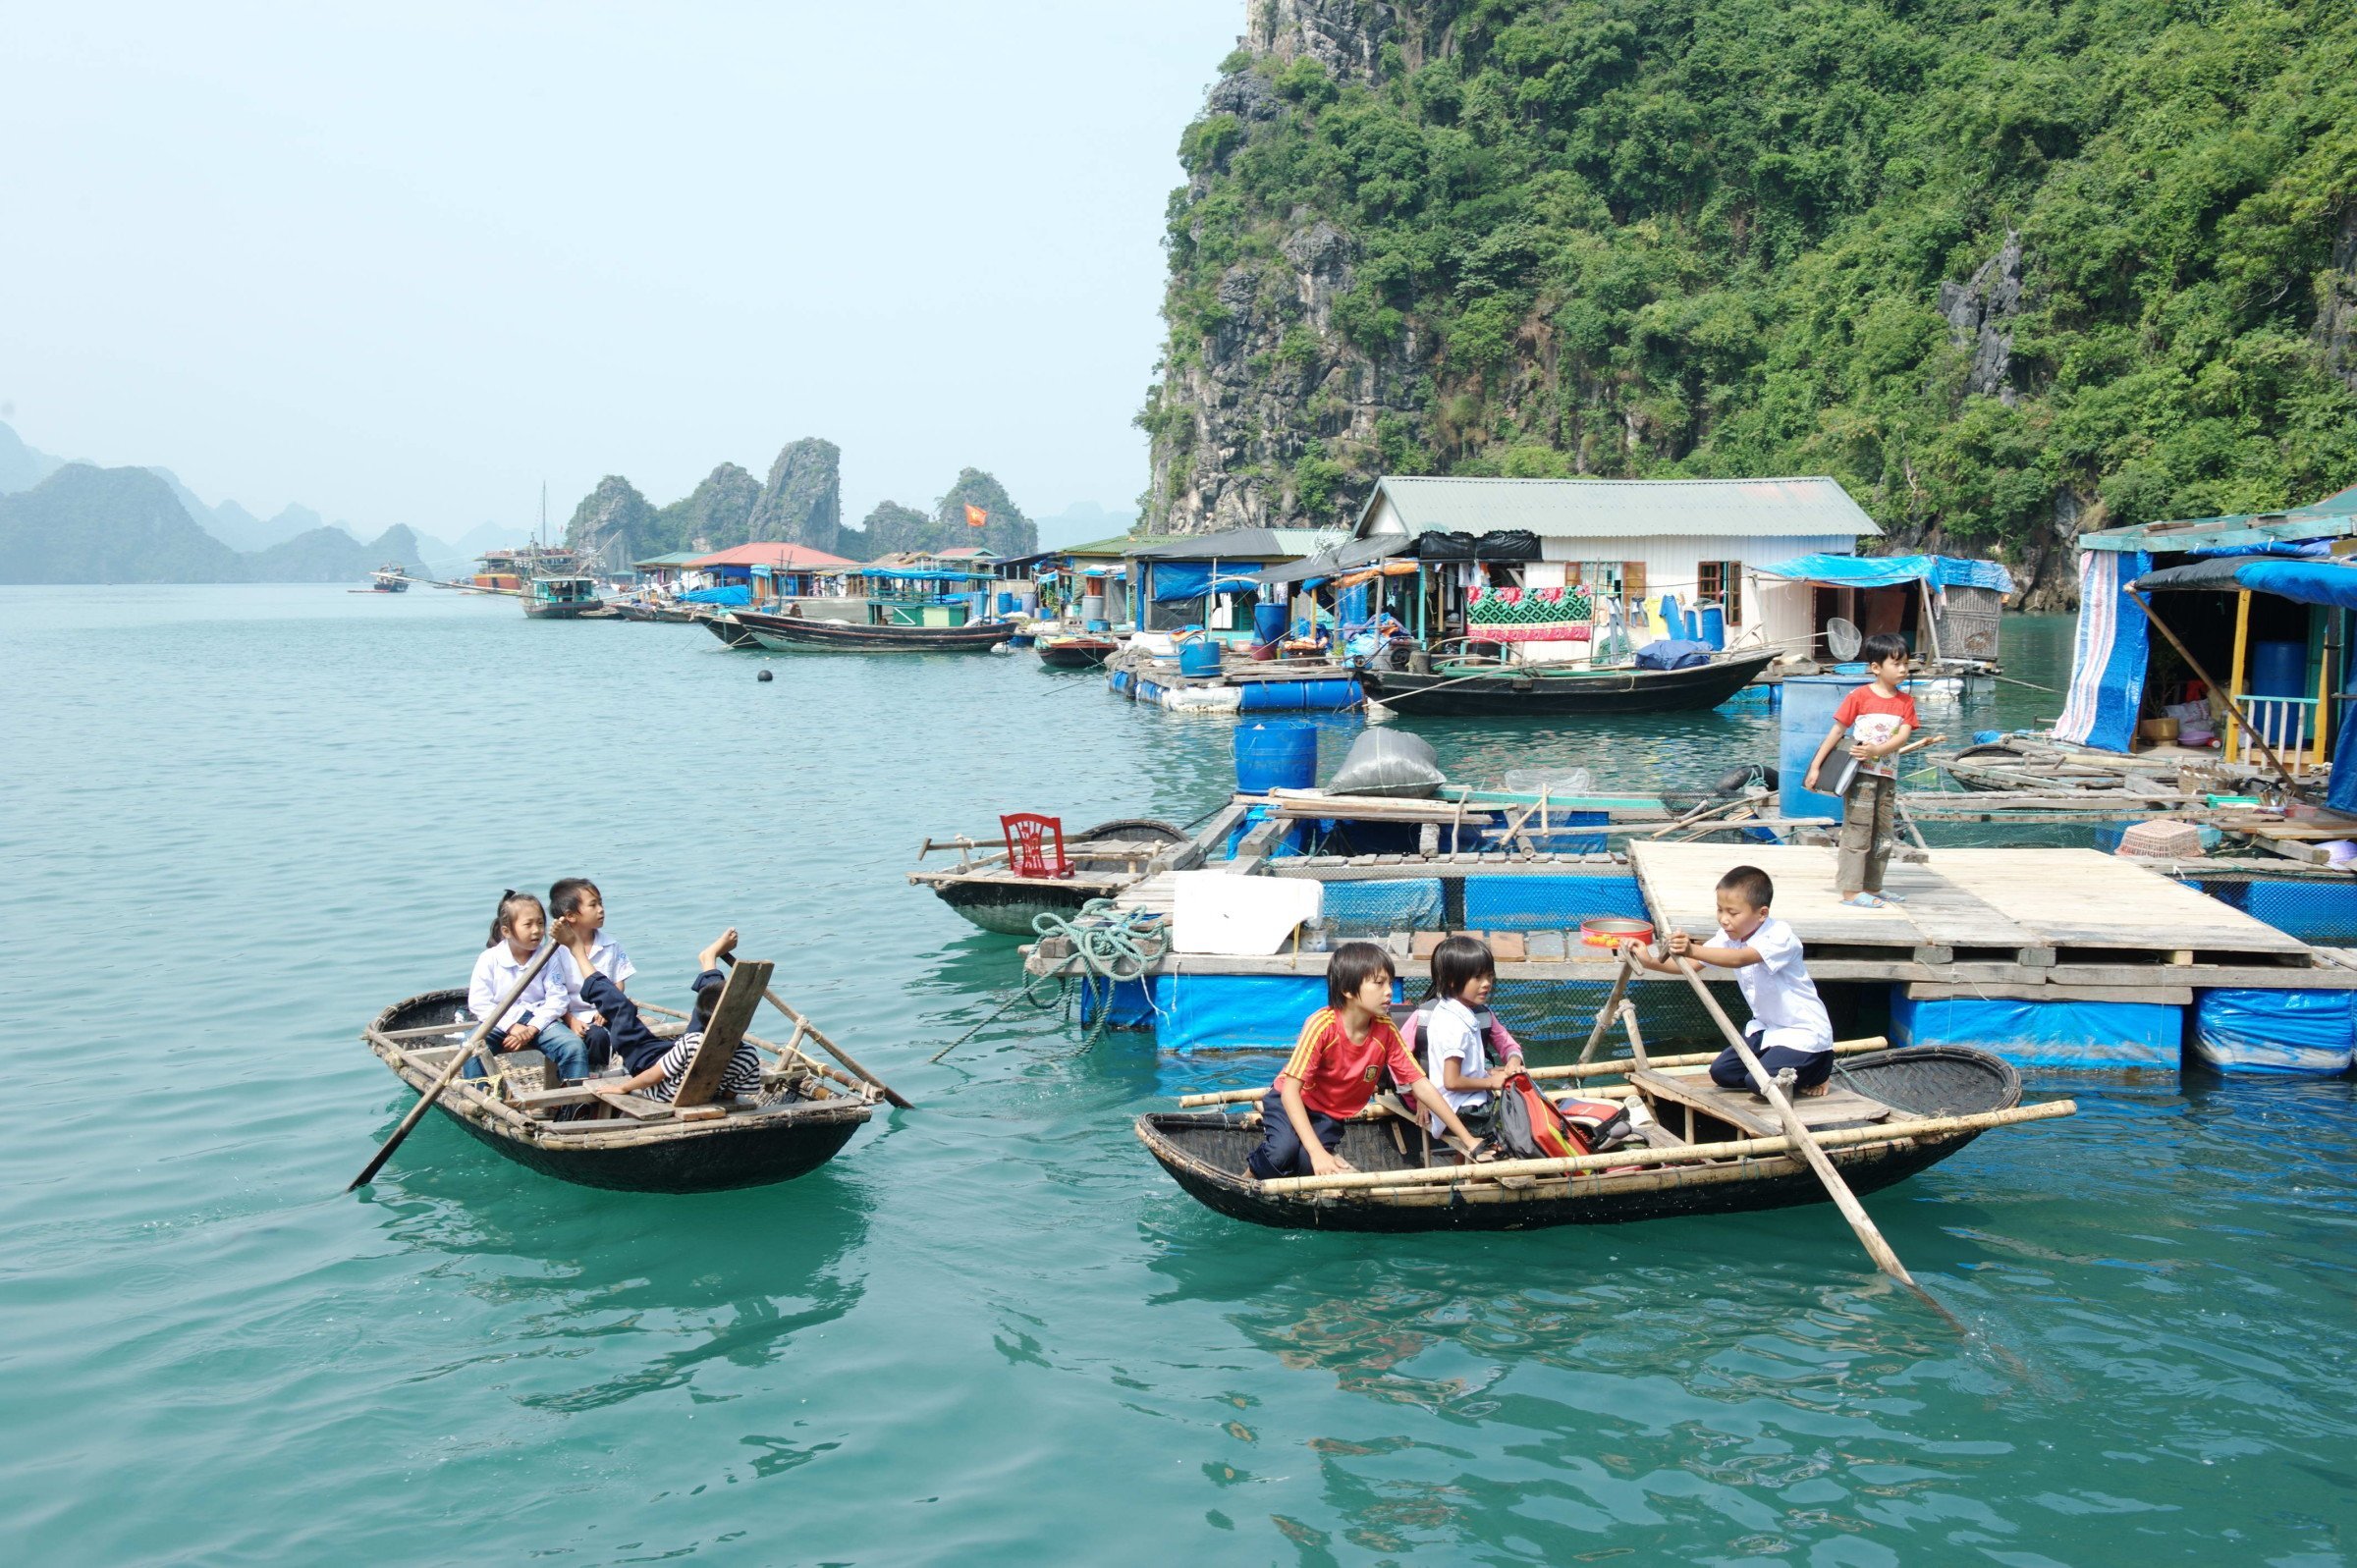 ake a break from the hustle and bustle of life and explore the tranquil beauty of Bai Tu Long